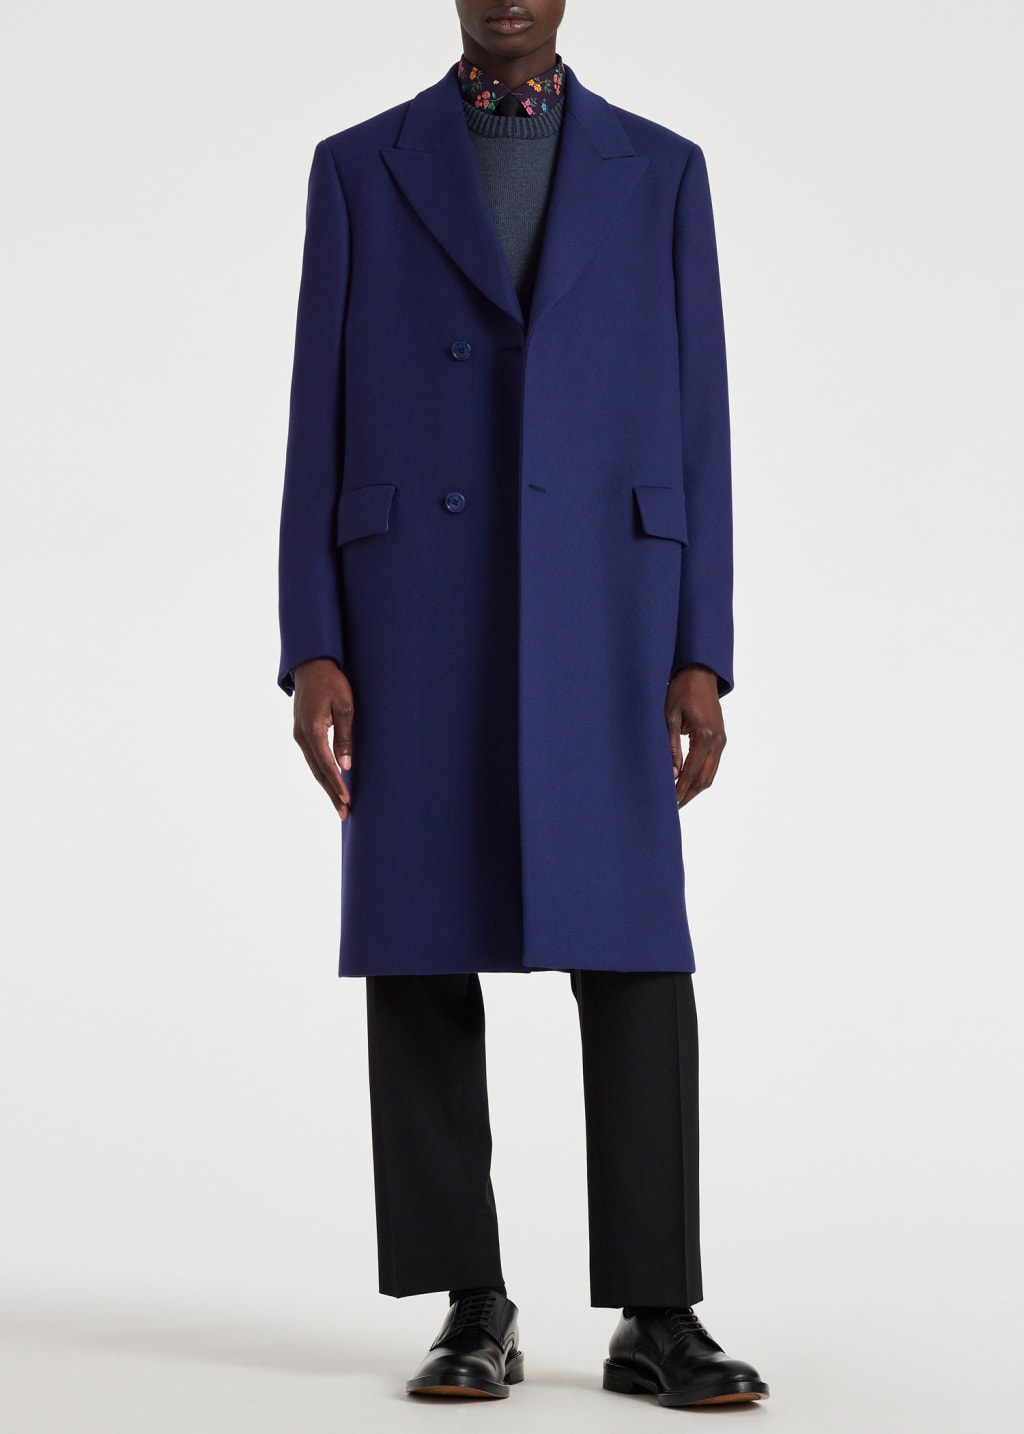 Model View - Royal Blue Wool-Cashmere Epsom Coat Paul Smith